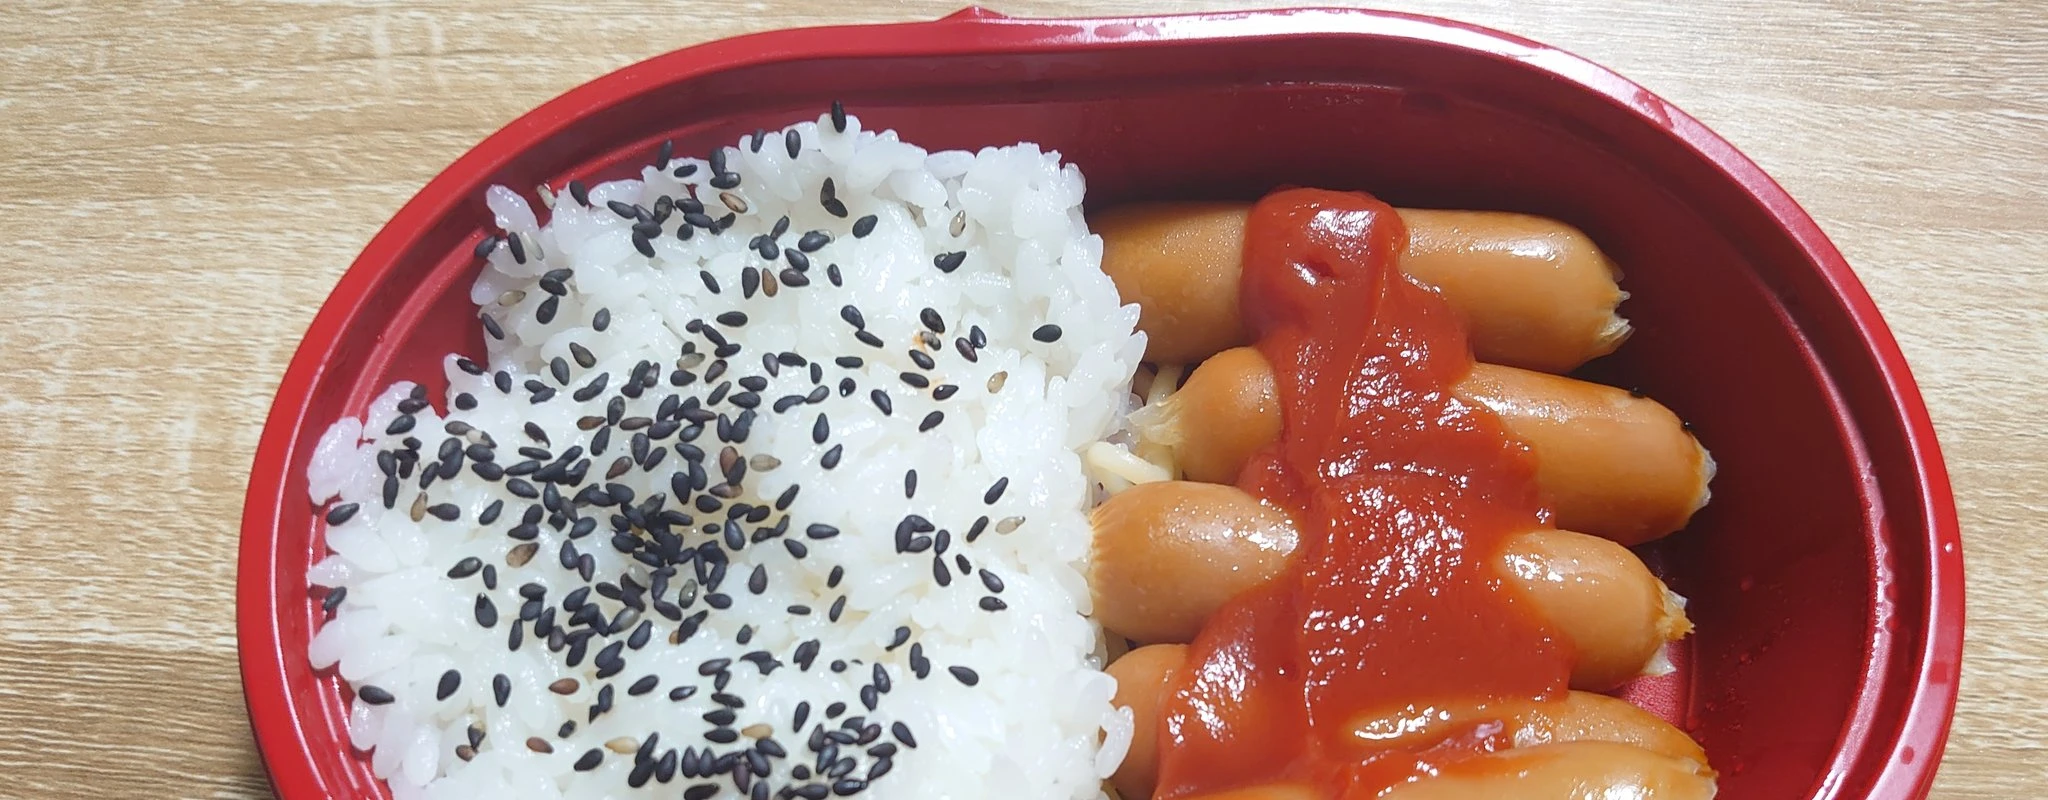 A 2,000 won lunch box at a convenience store in Japan that took 10 years from planning to selling.